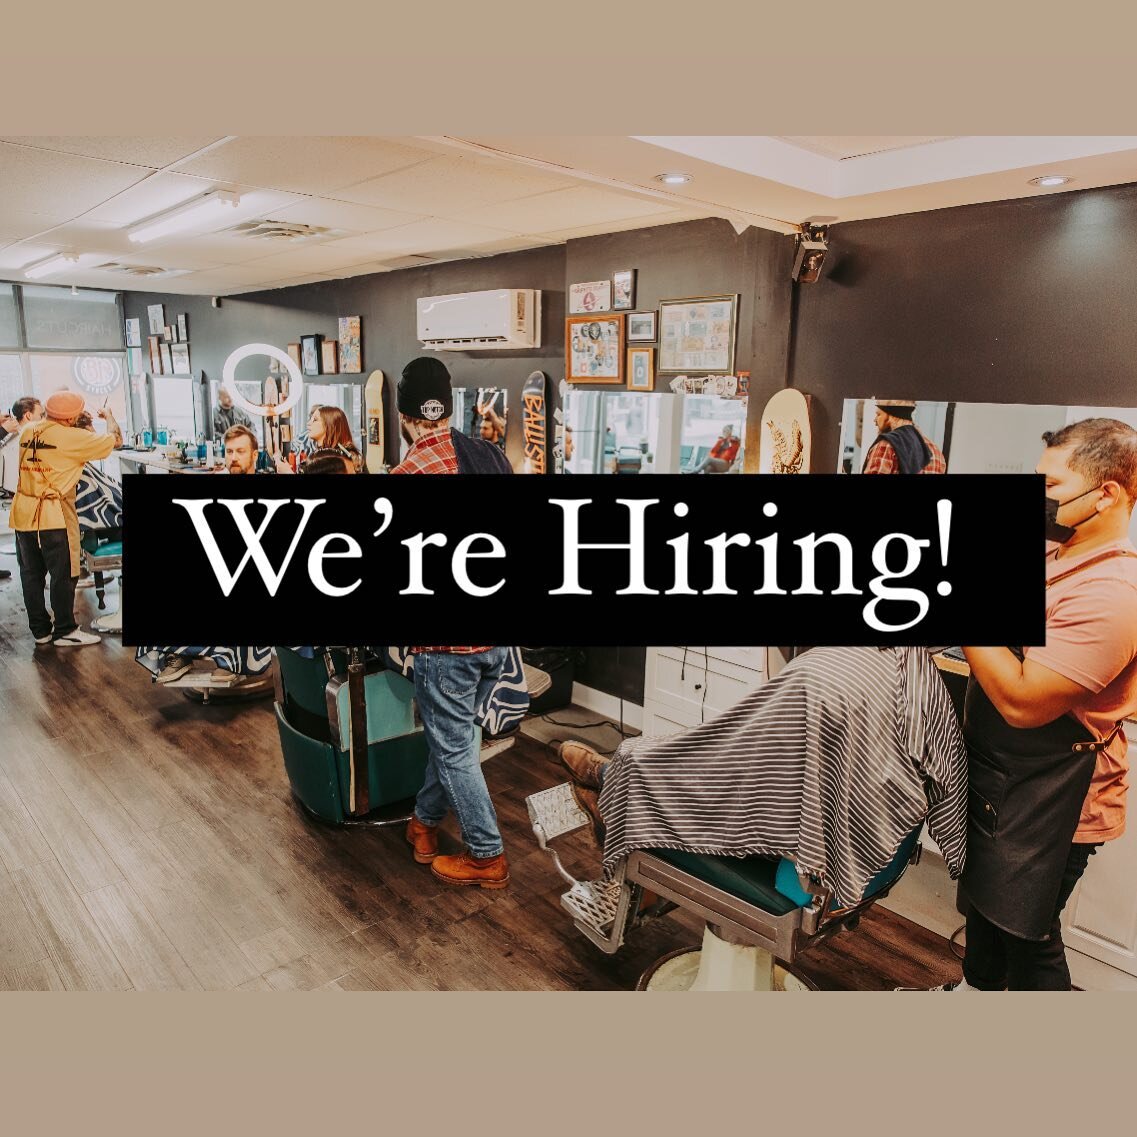 This summer we will be adding a 7th chair and operating 7 days a week, leaving lots of room for new barbers. Offering part time and full time positions. 💈🤘